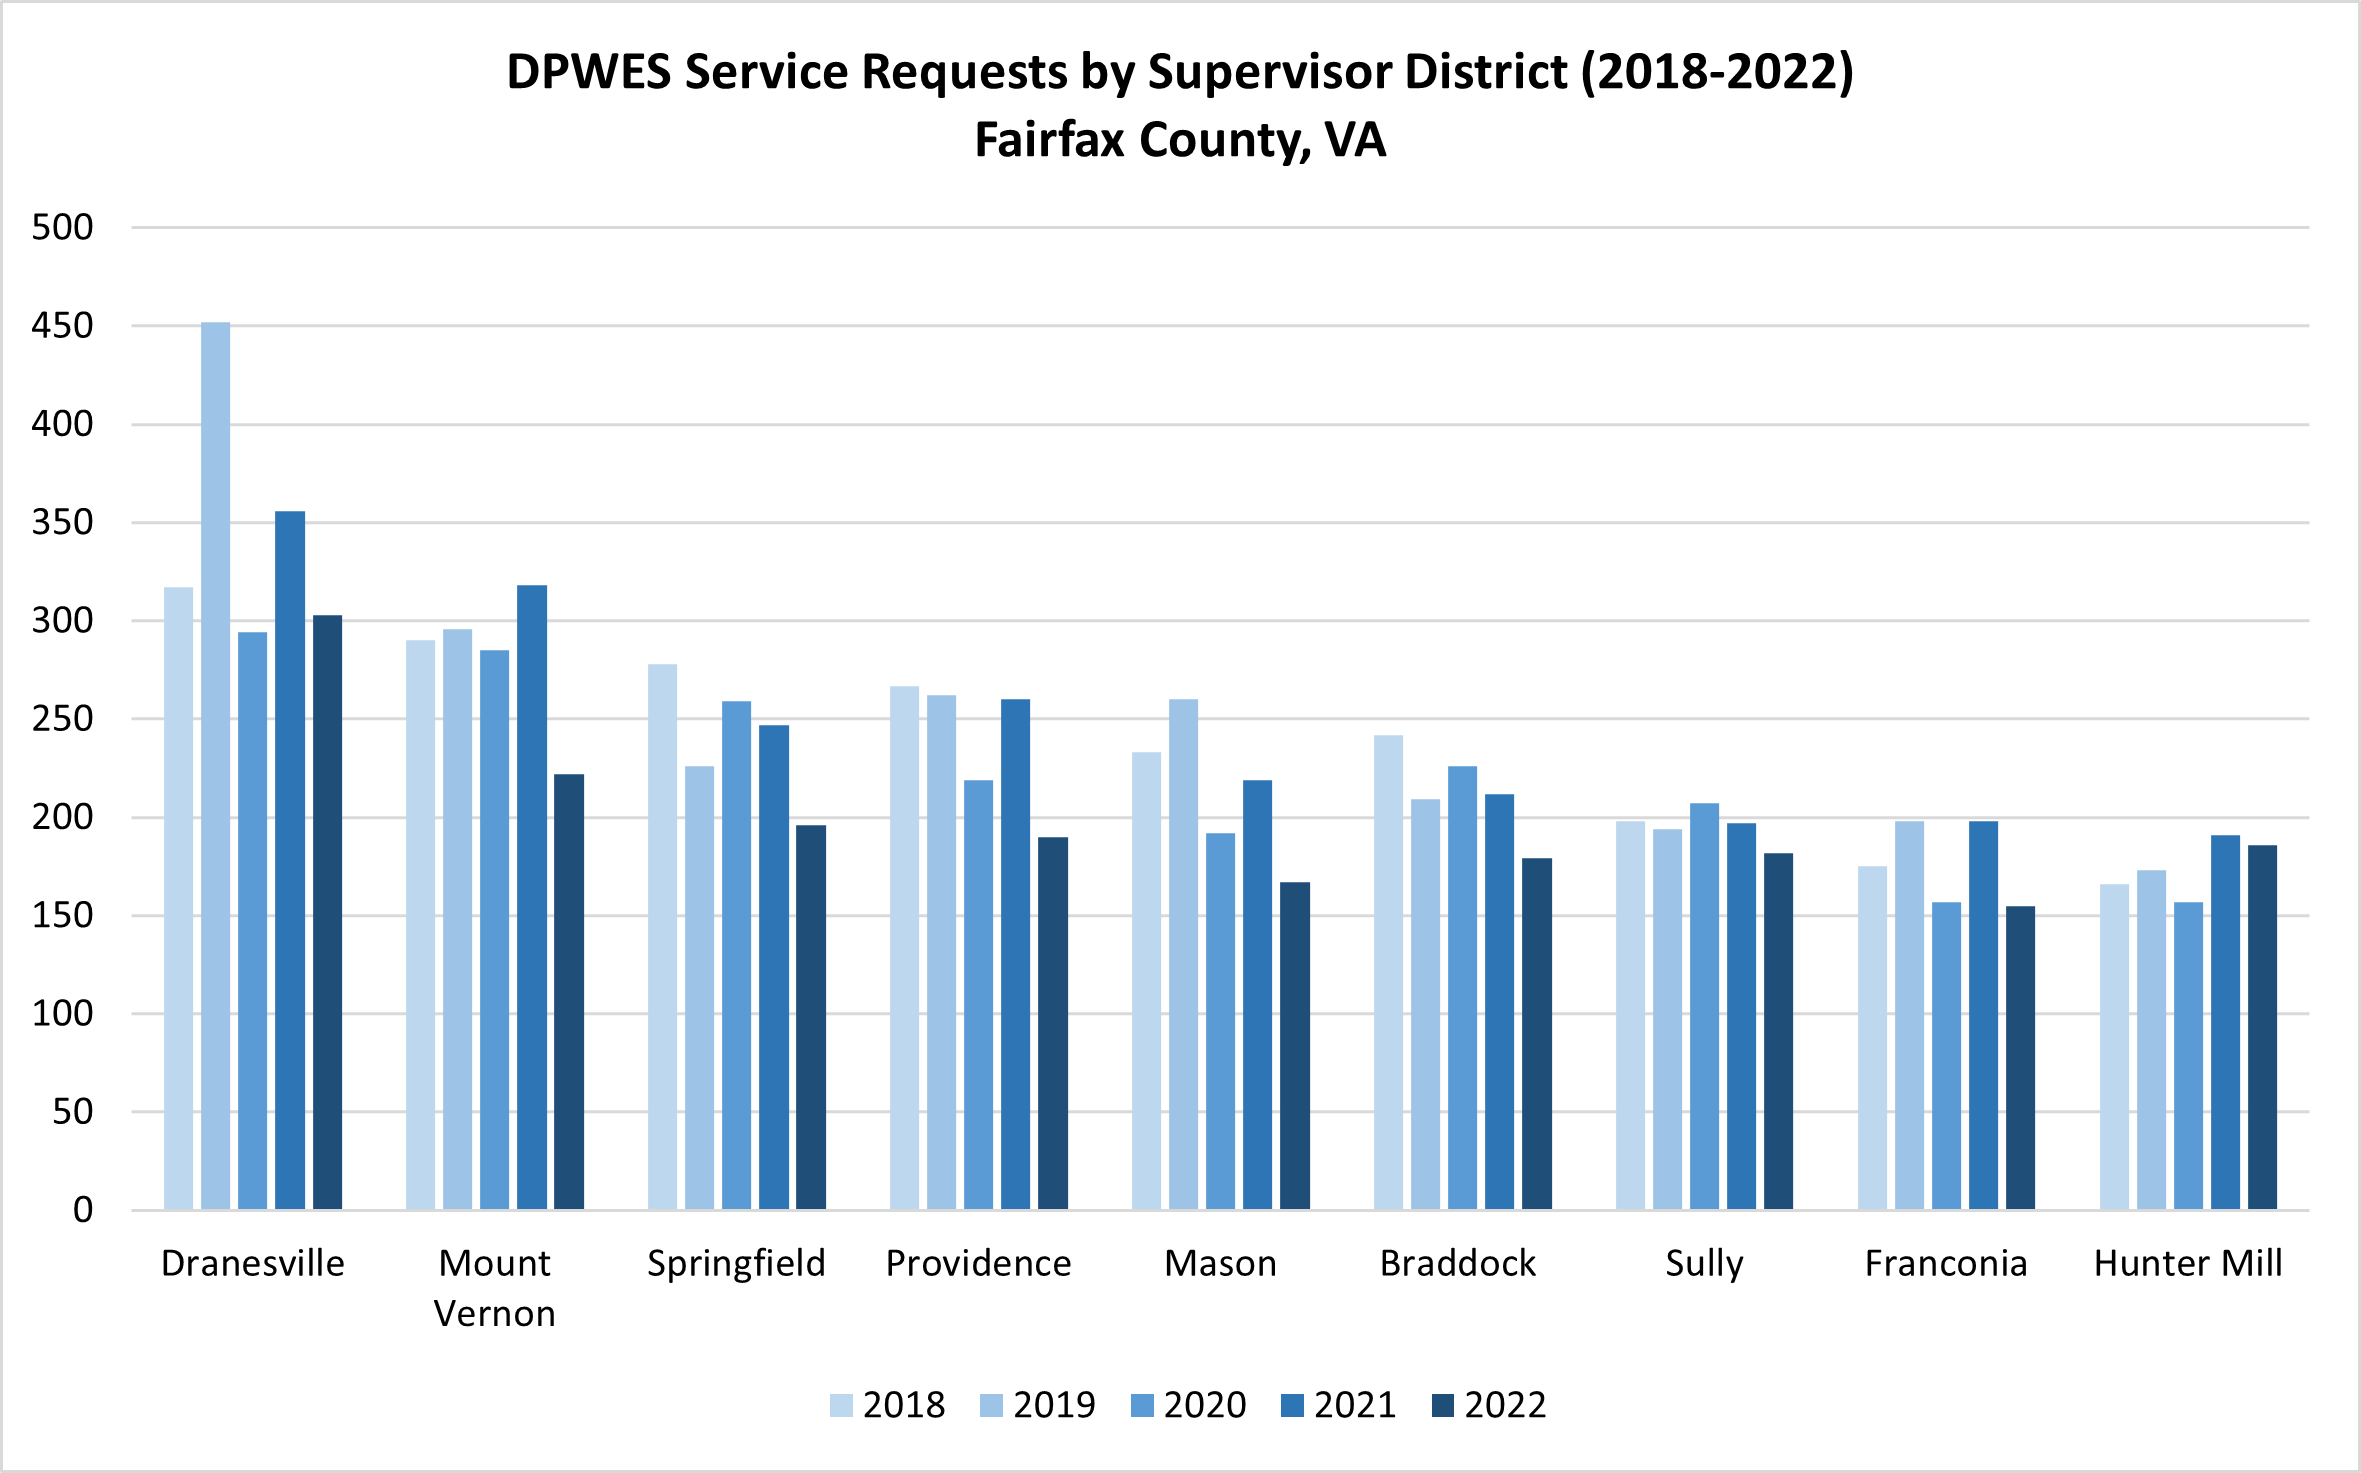 DPWES service requests by supervisor district from 2018 to 2022 